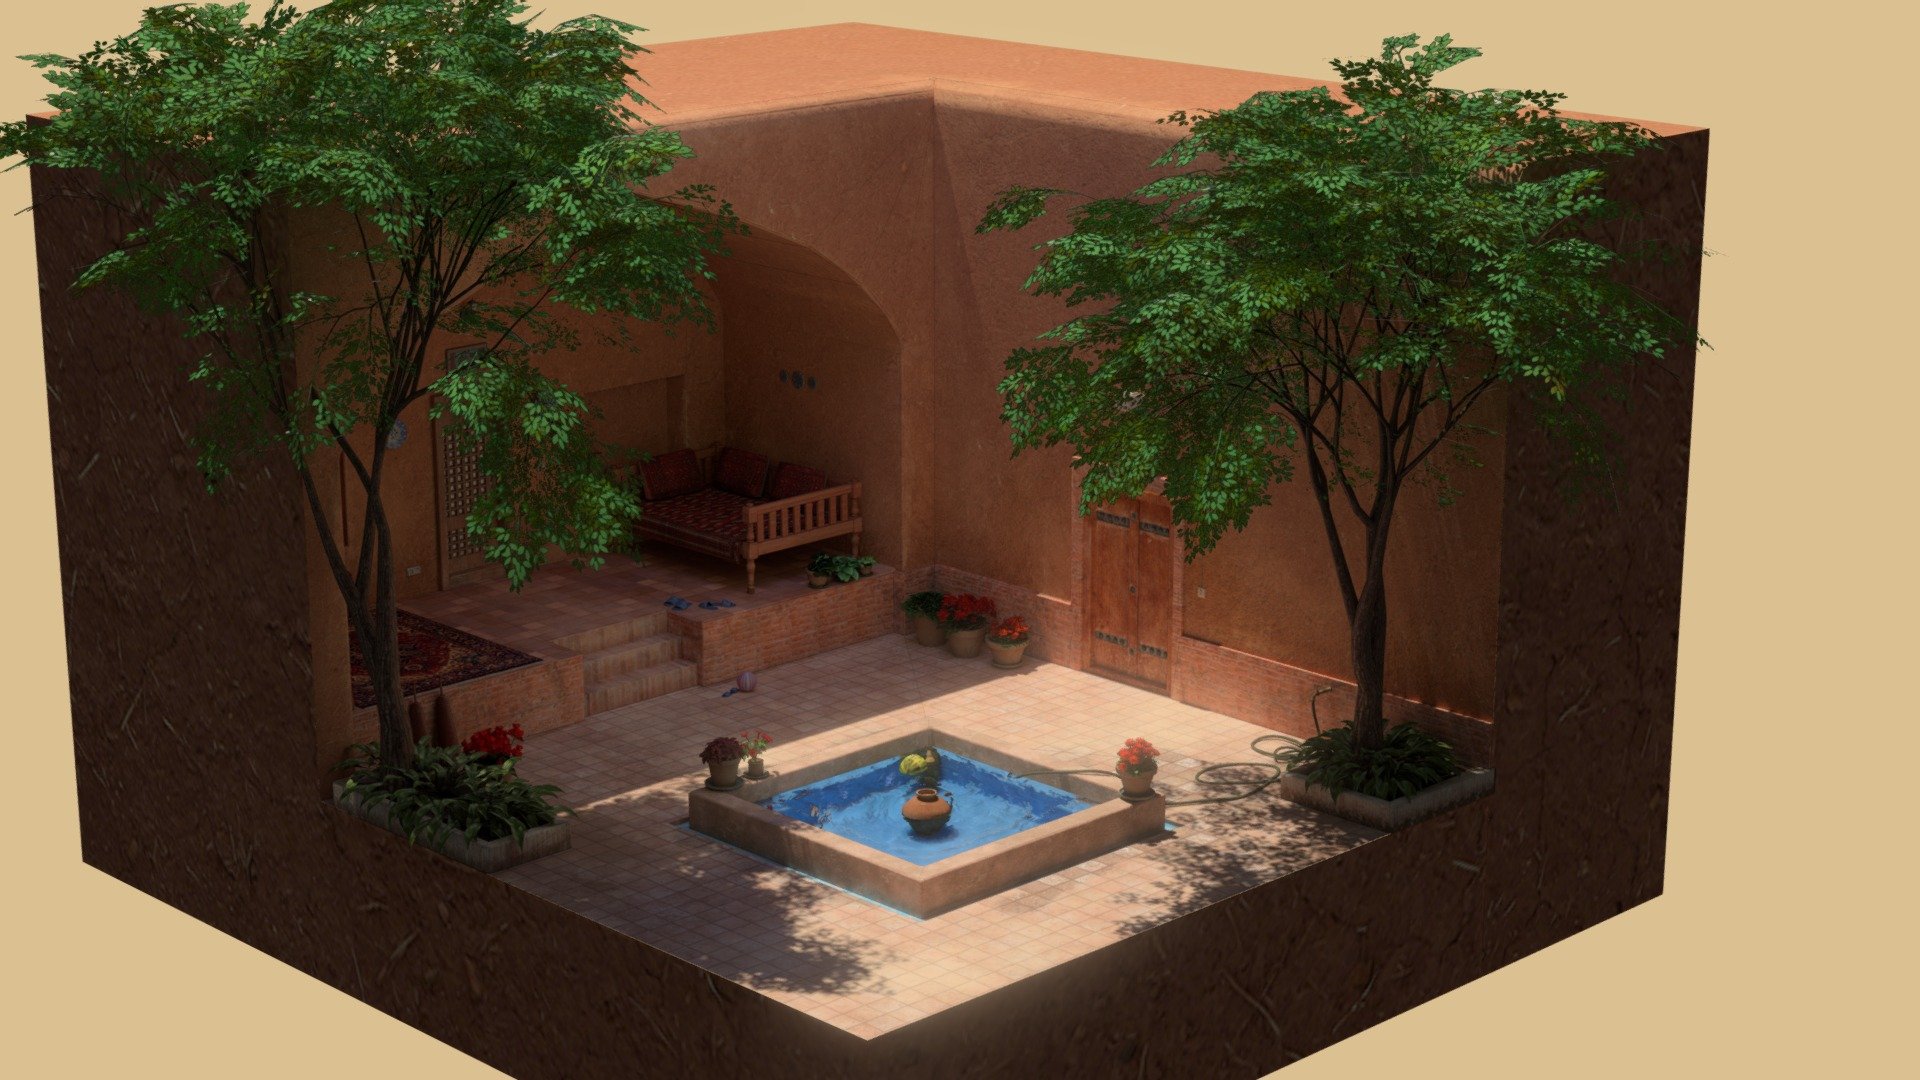 MAKE SURE TO SET THE TEXTURE QUALITY TO HD. In your viewer select on Settings and set the texture quality to HD instead of SD to get the maximum resolution.

The day version of a persian garden scene I modeled for my fluid simulation in Unity. I made it with Blender and Substance, you can view my reference board here: https://www.pinterest.de/shshahrabi/persian-garden/

And the night version here: https://skfb.ly/6XX8T

You can download some of the individual stuff in higher resolution with PBR map on my sketchfab.

For the day version I decided not to put any music since afternoons people are always napping and is a vey quite time 3d model